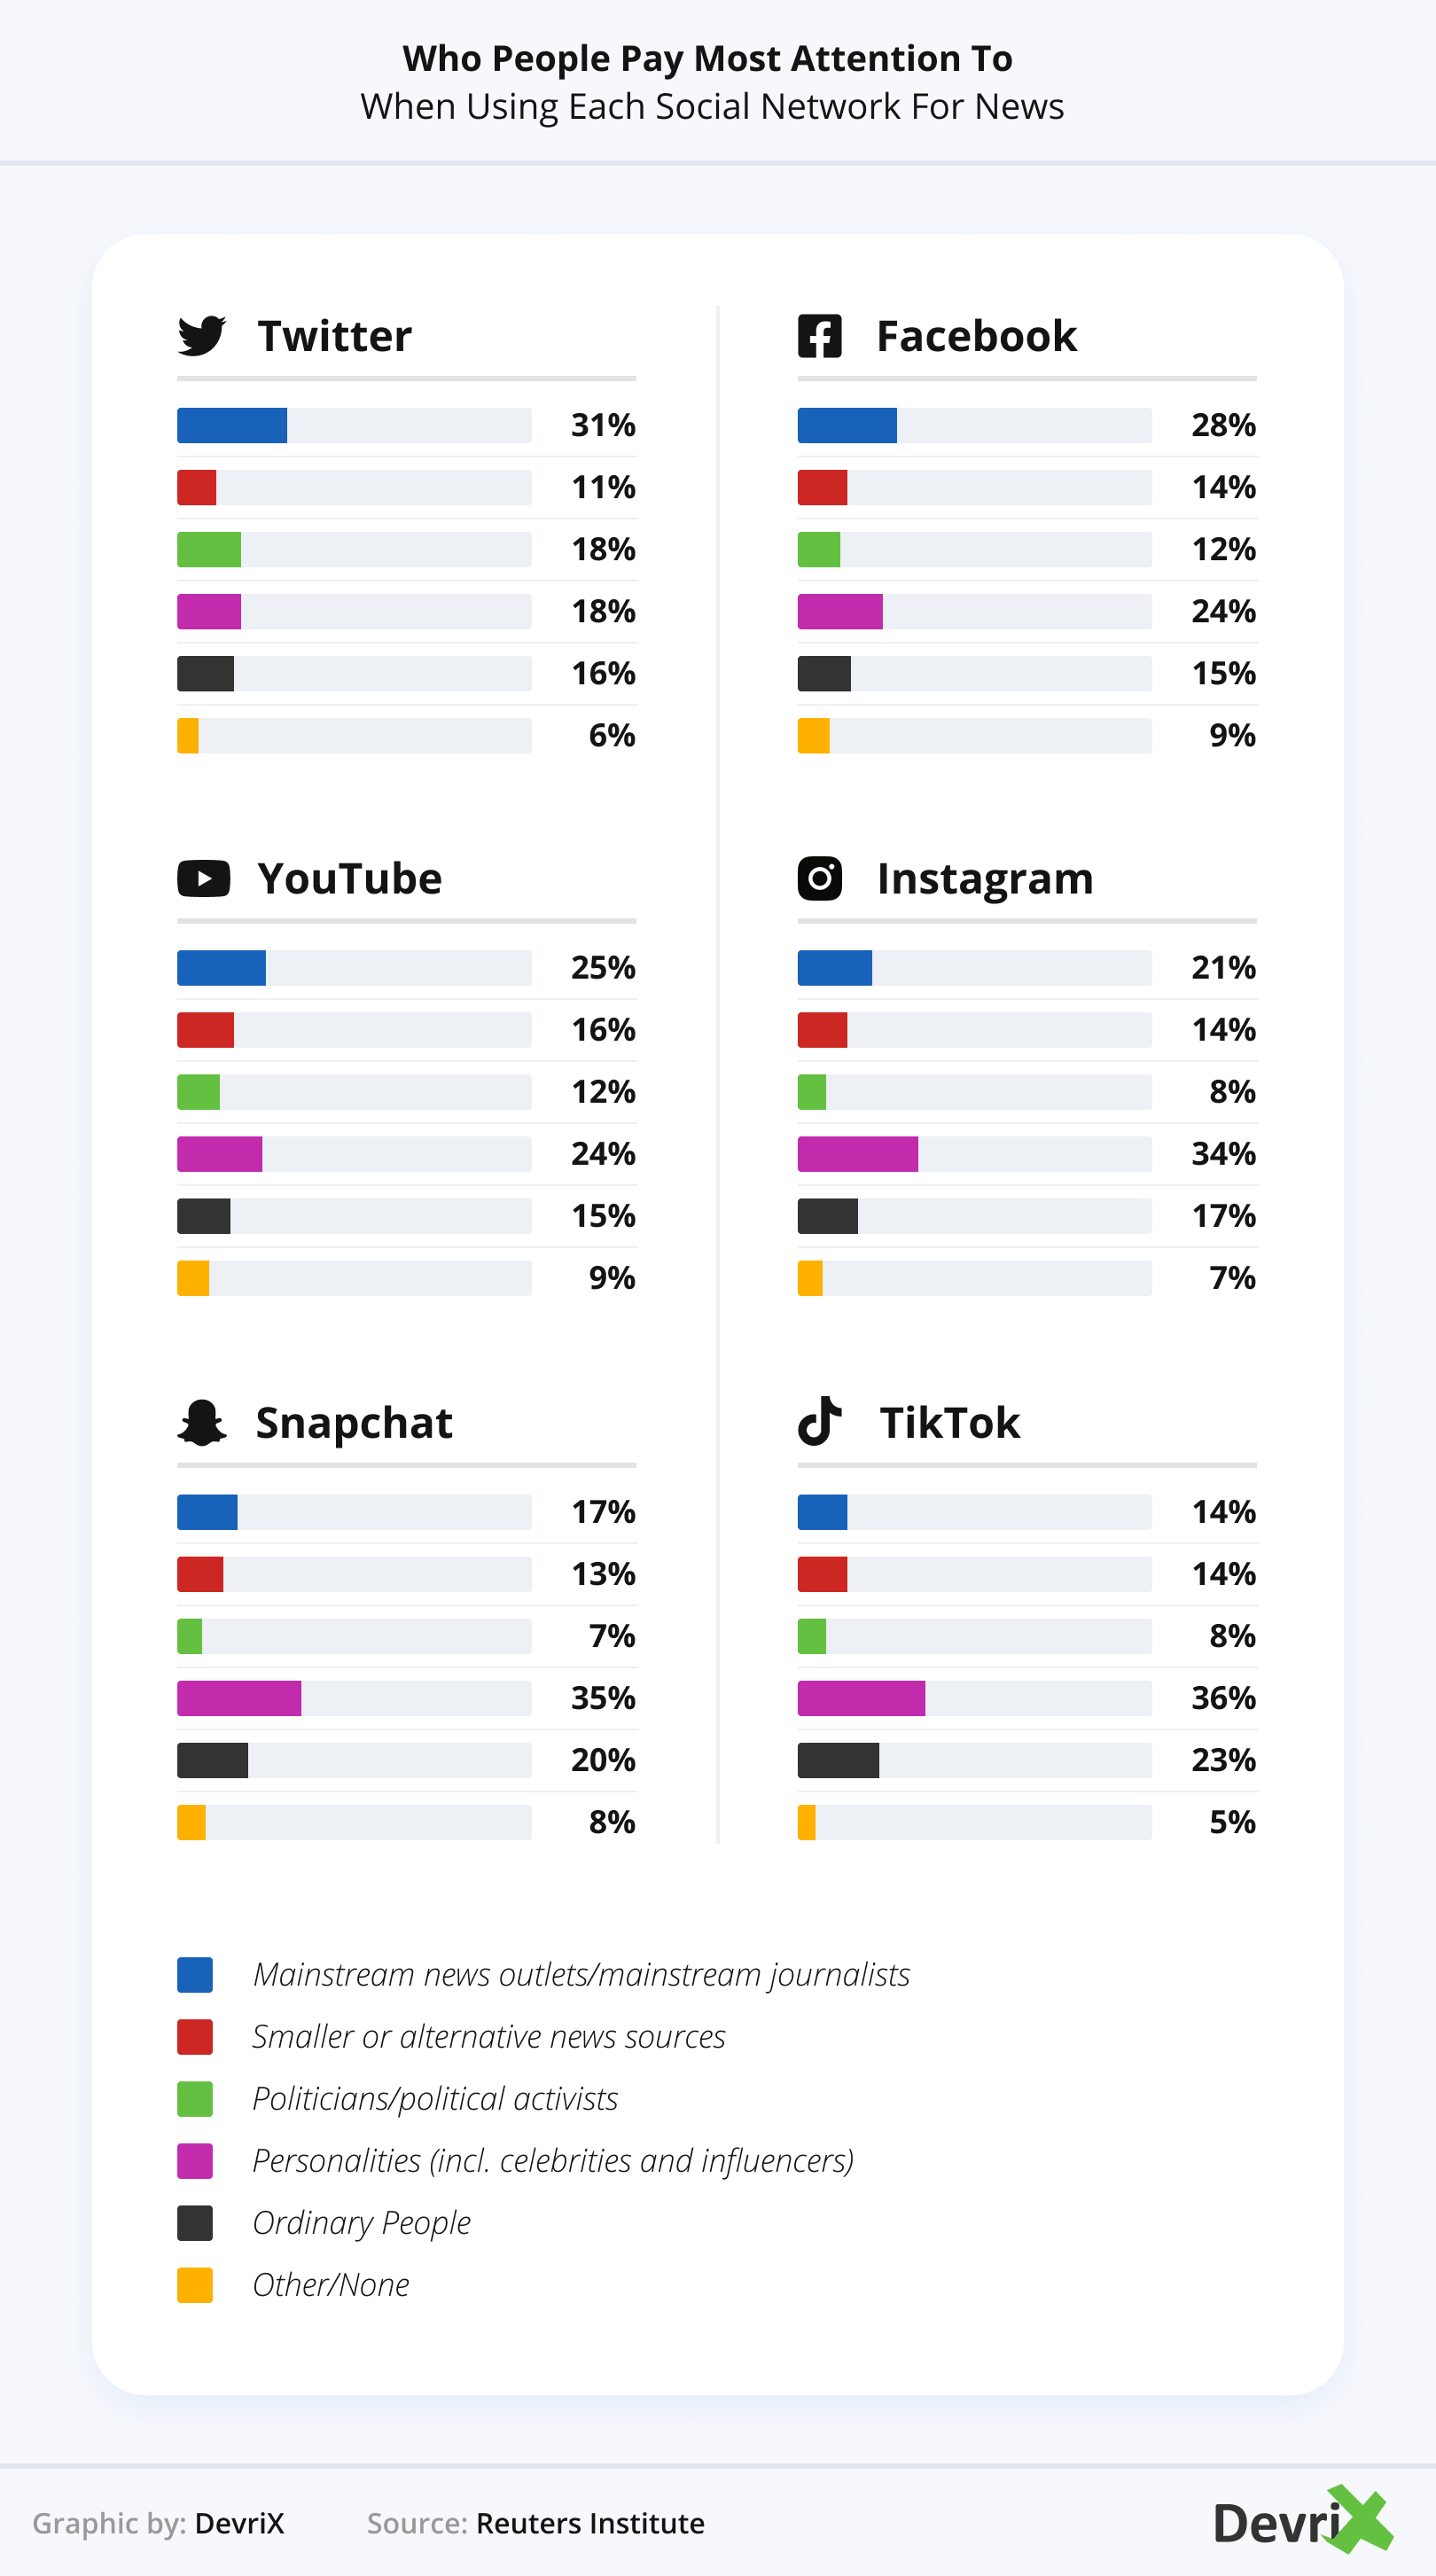 Proportion that used each social network for news in the last week